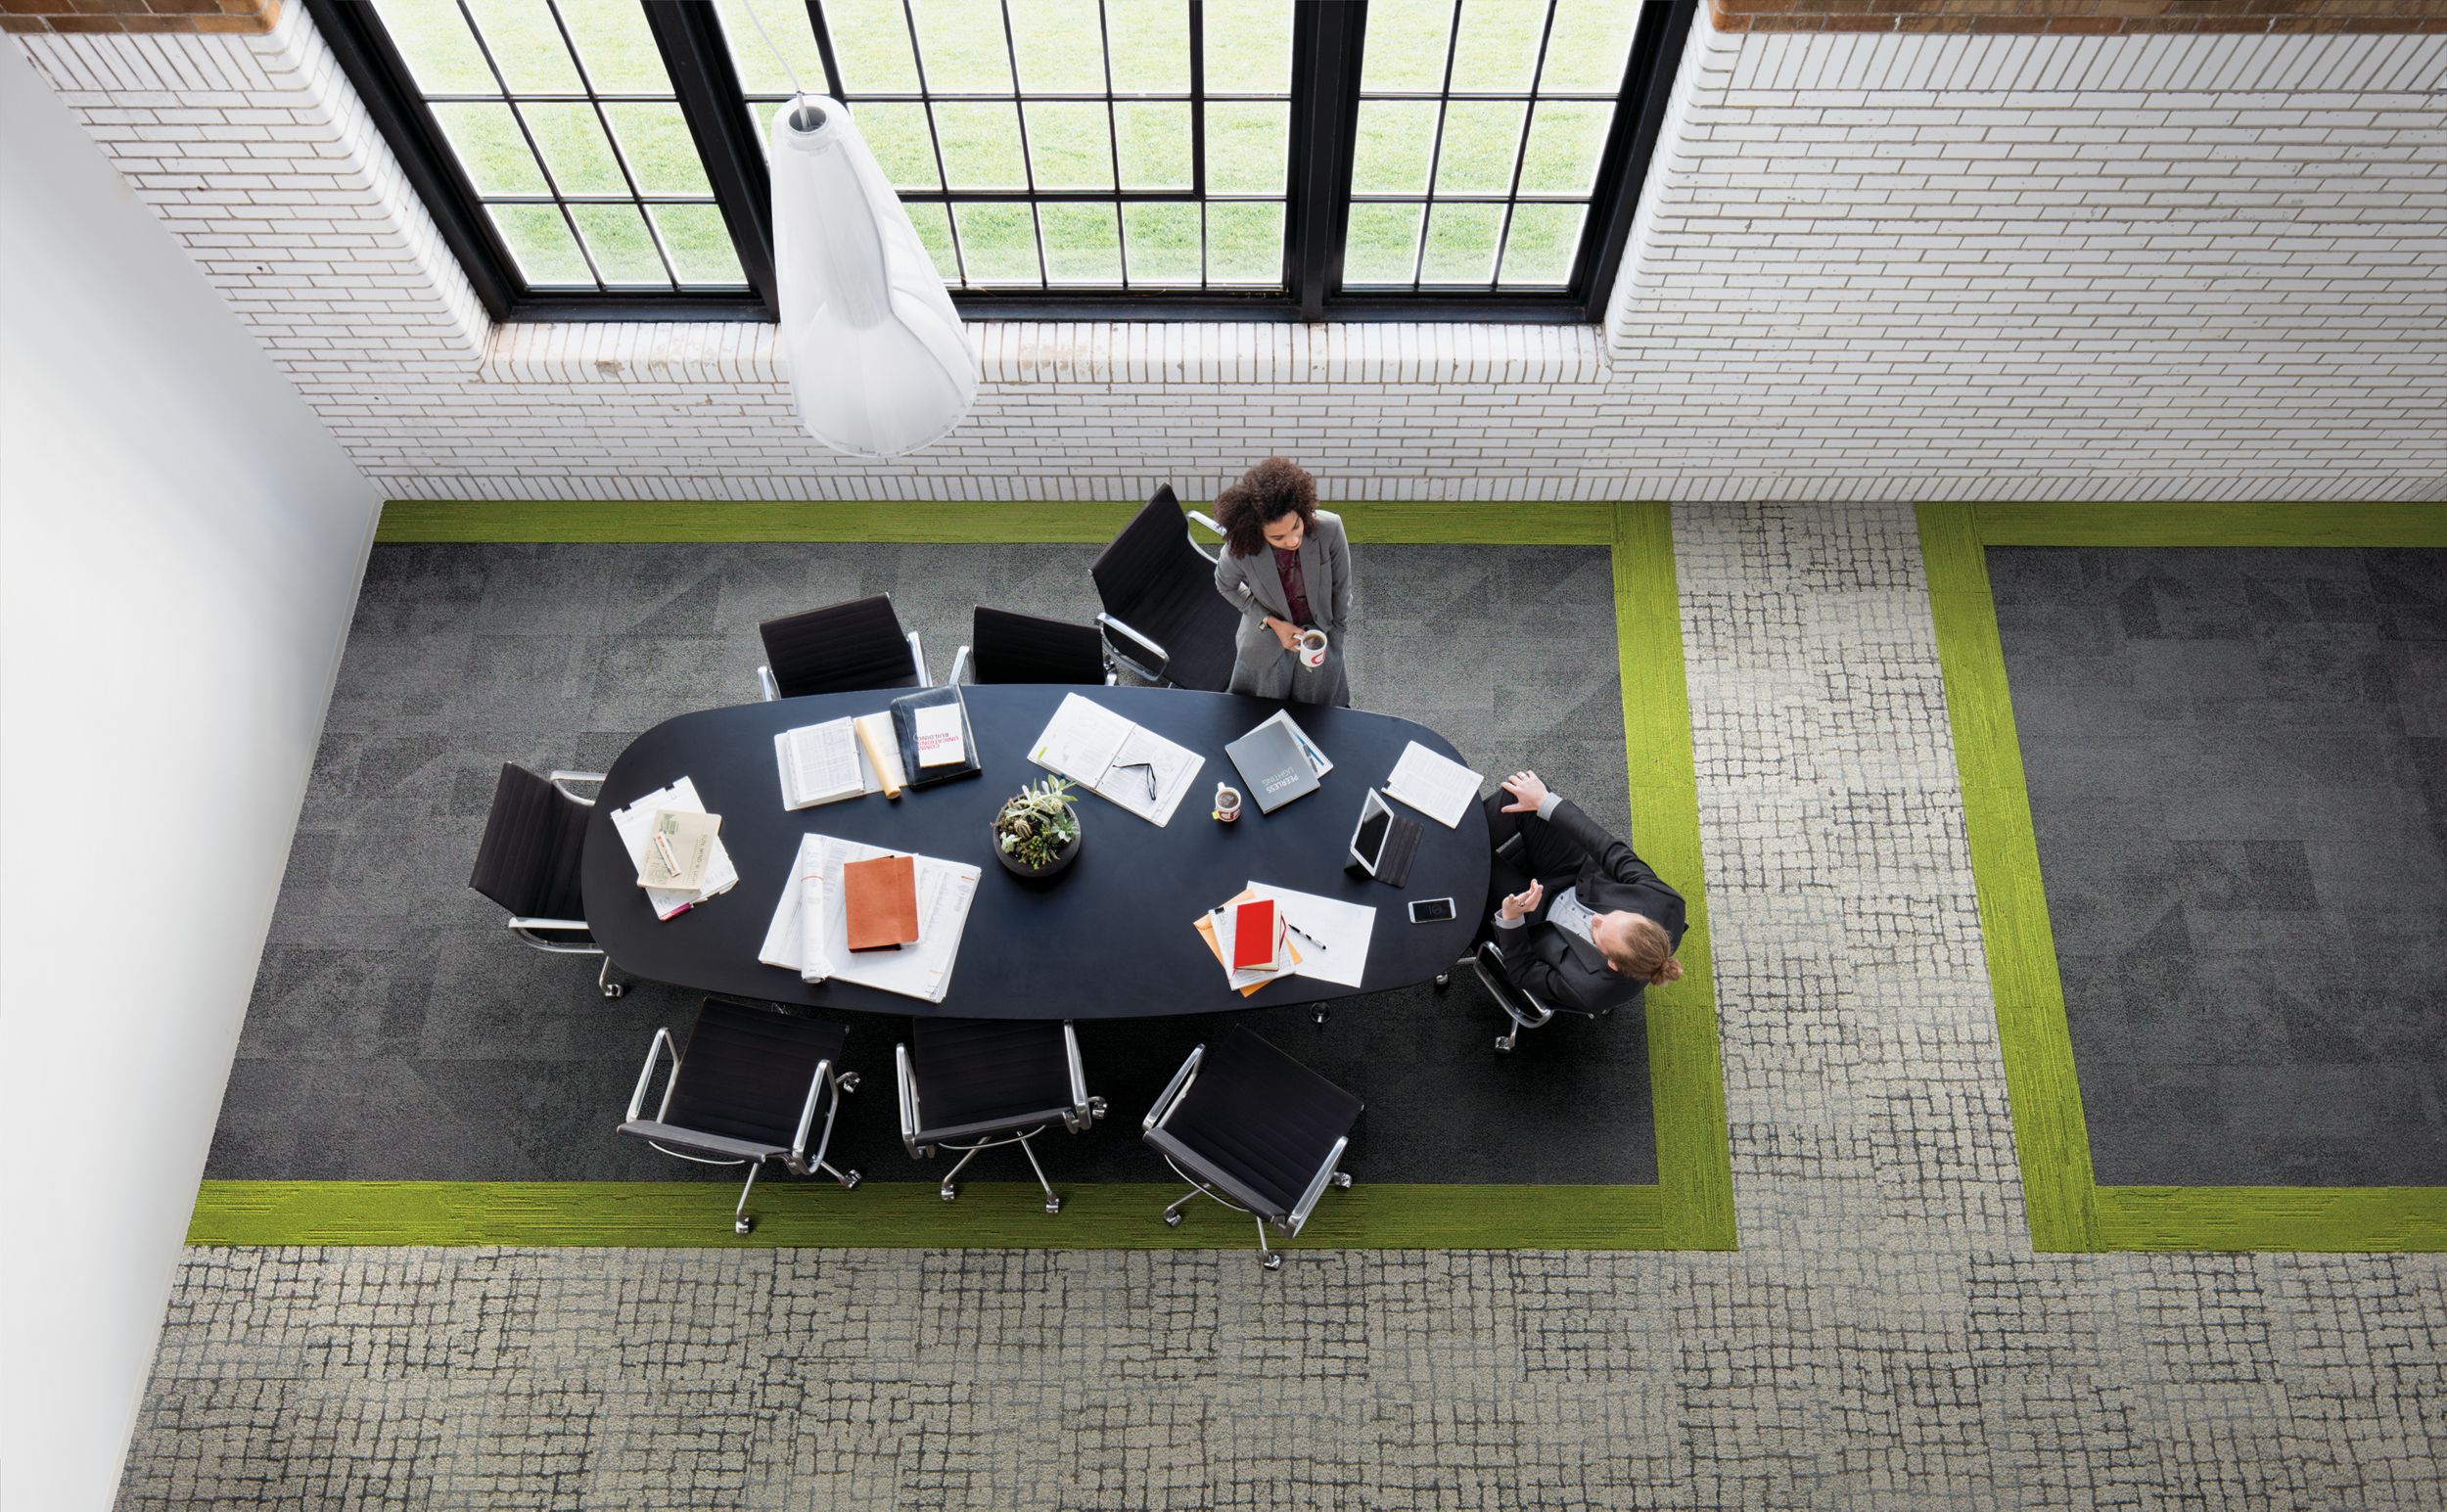 Interface Paver and Sett in Stone carpet tile with UR501 plank carpet tile in overhead view of meeting area with man and women conversating imagen número 6